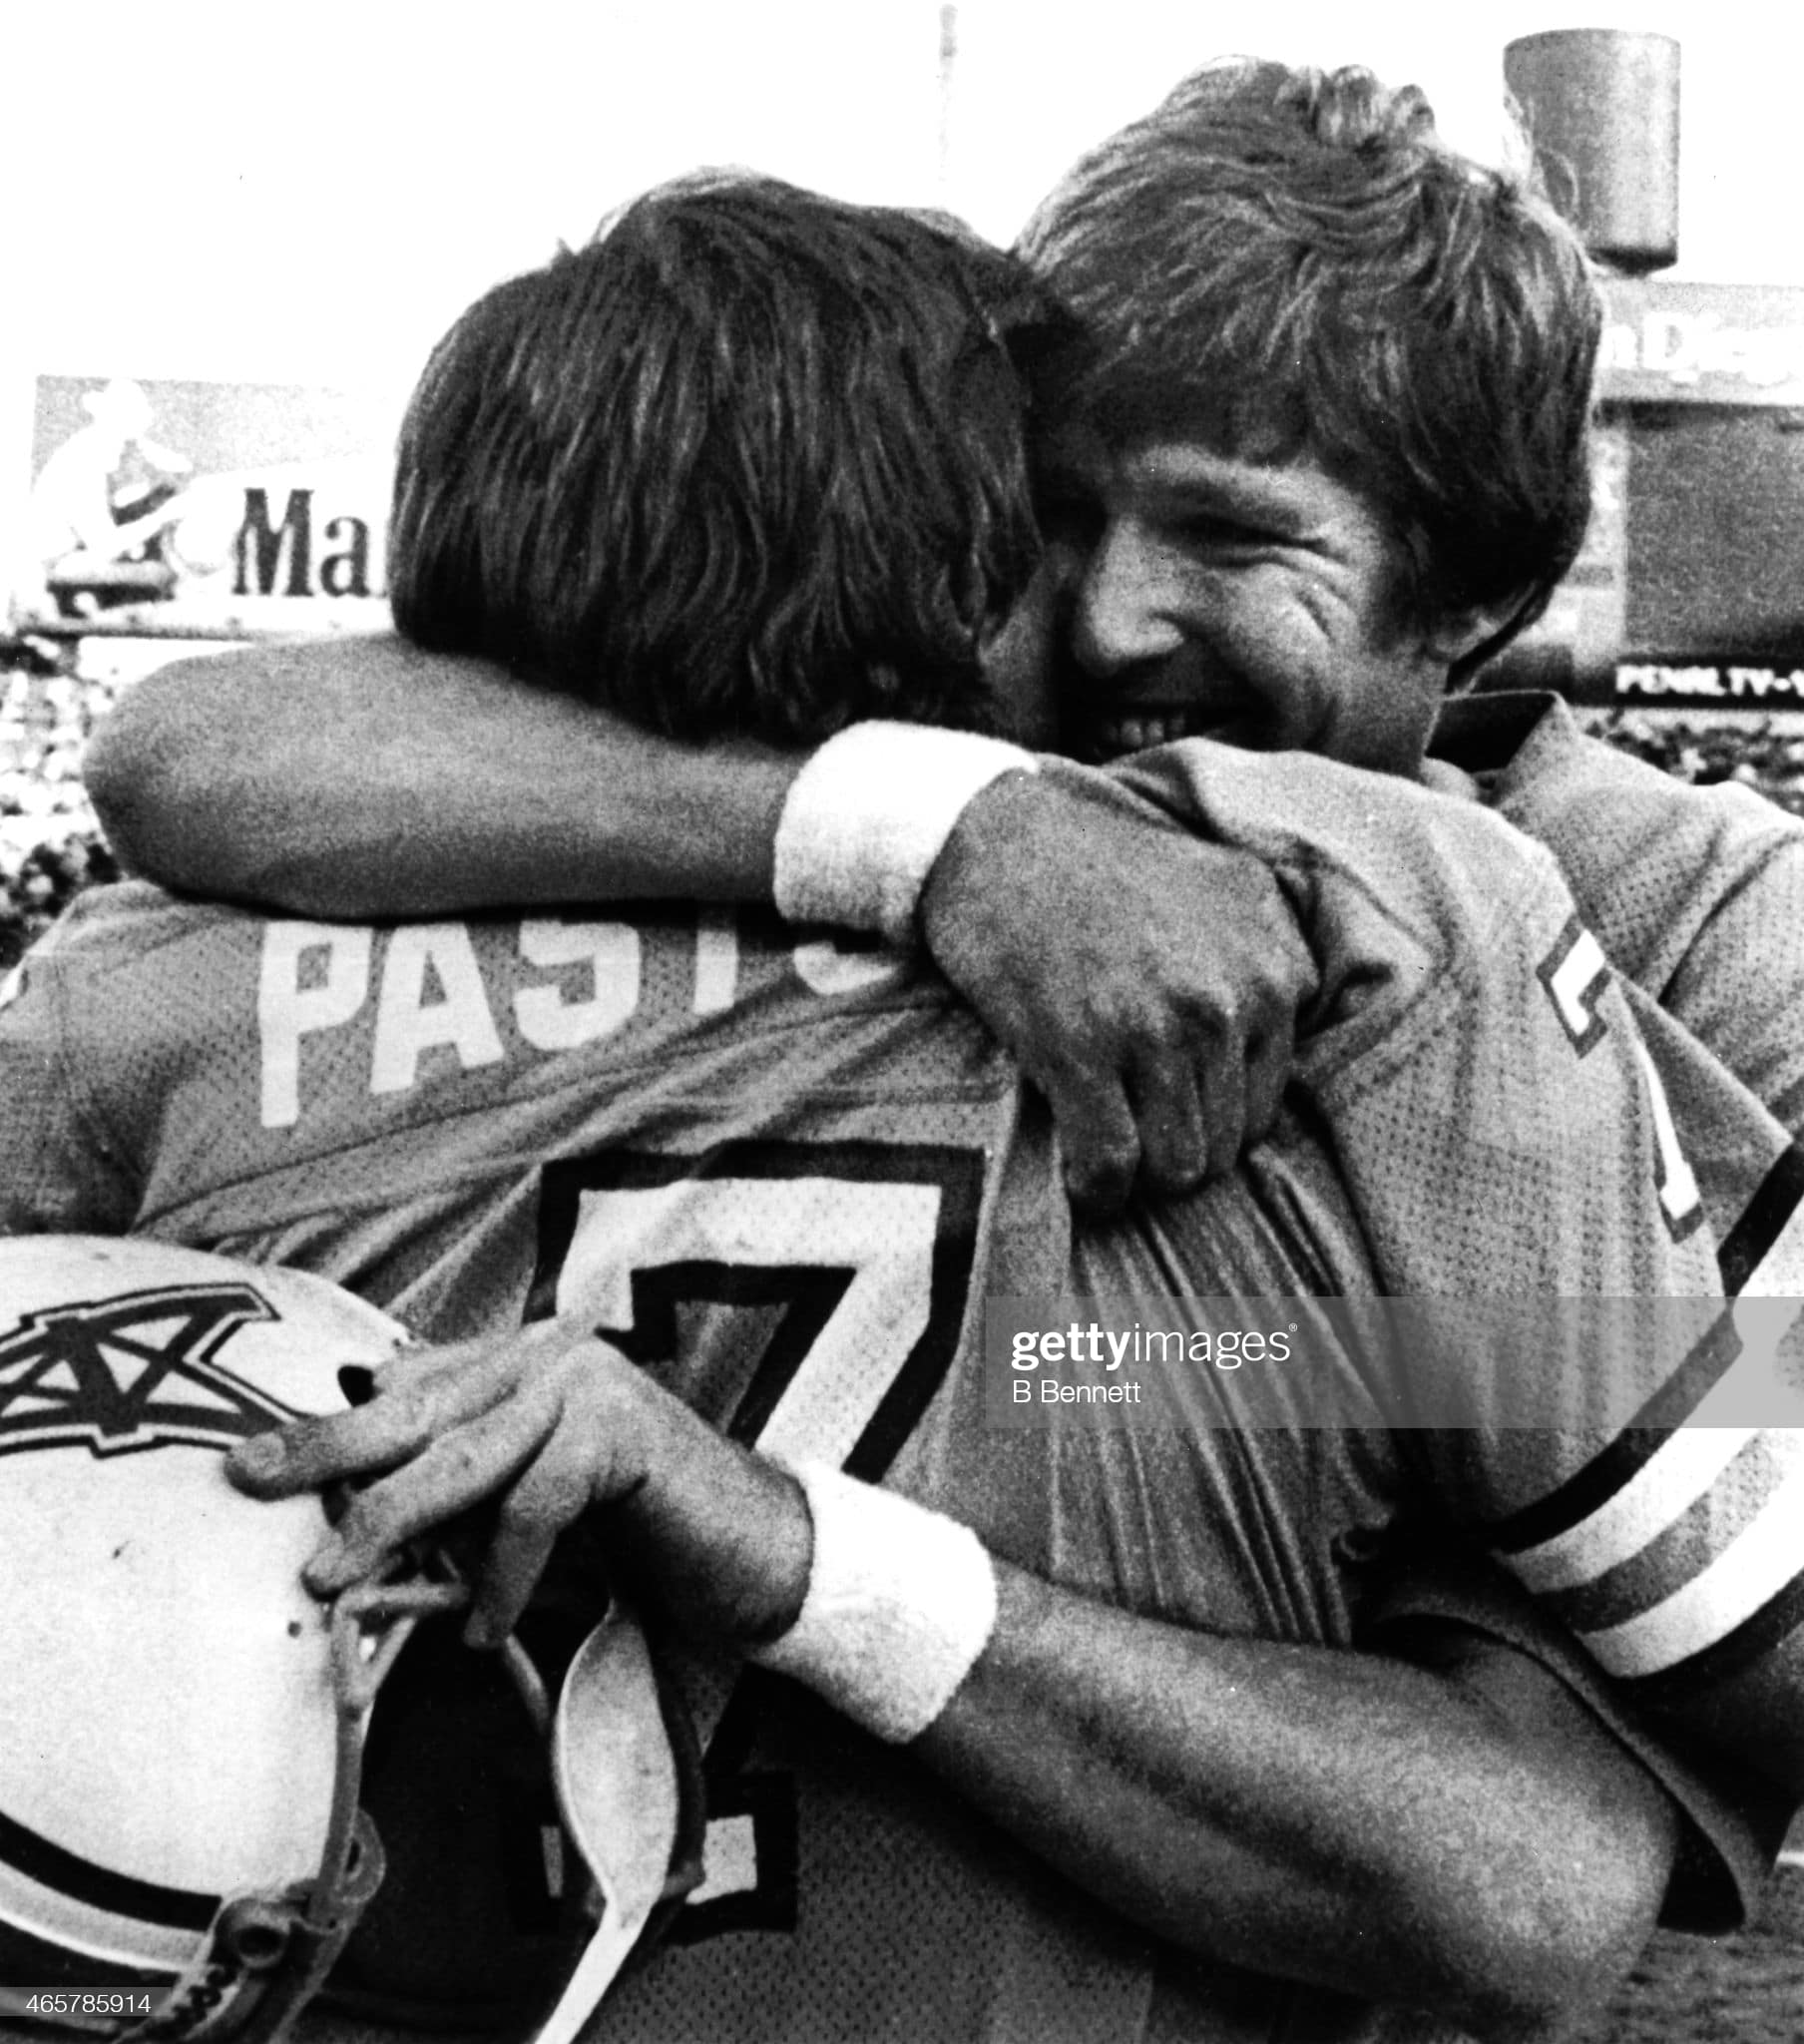 SAN DIEGO, CA - DECEMBER 29:  Backup quarterback Gifford Nielsen #14 hugs quarterback Dan Pastorini #7 after Nielsen led the Oilers past the San Diego Chargers in the 1979 Division Game on December 29, 1979 at the San Diego Stadium in San Diego, California.  The Oilers defeated the Chargers 17-14.  (Photo by B Bennett/Getty Images)